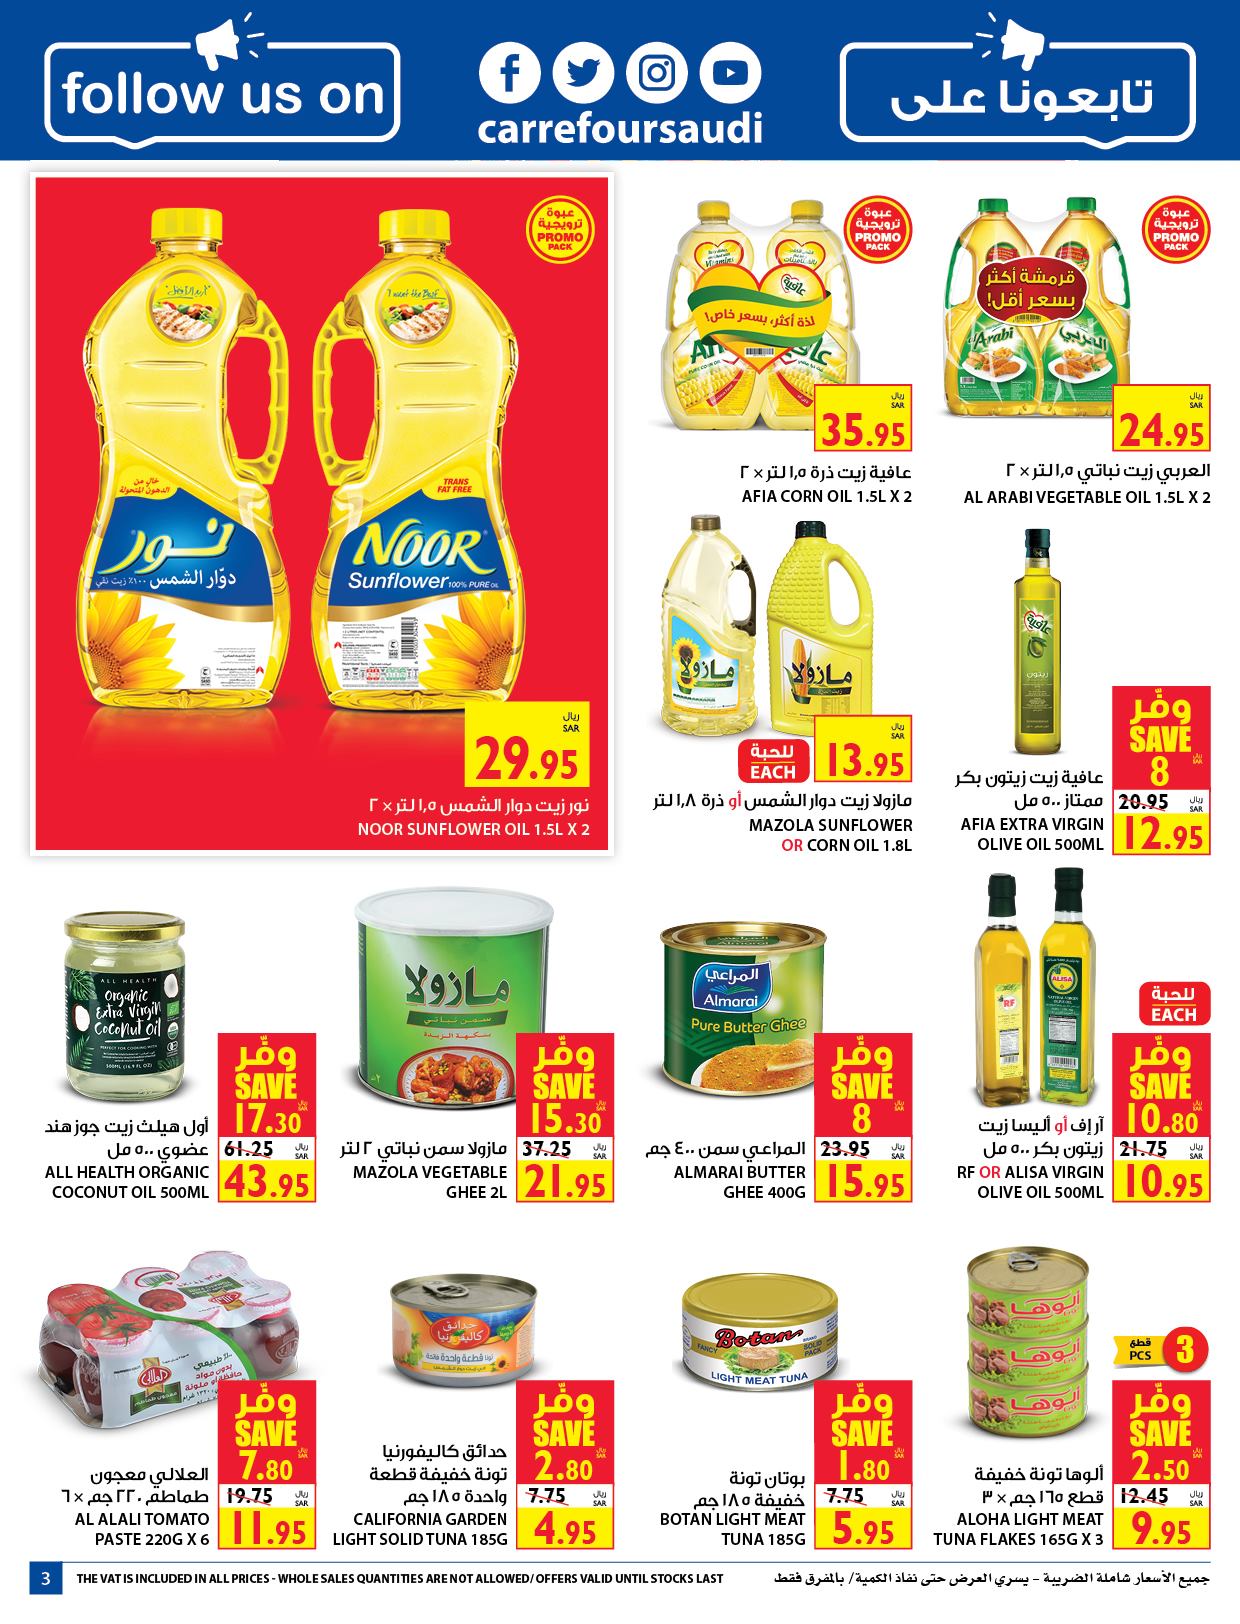 Carrefour Festival Offers from 12/8 till 25/8 | Carrefour KSA 4